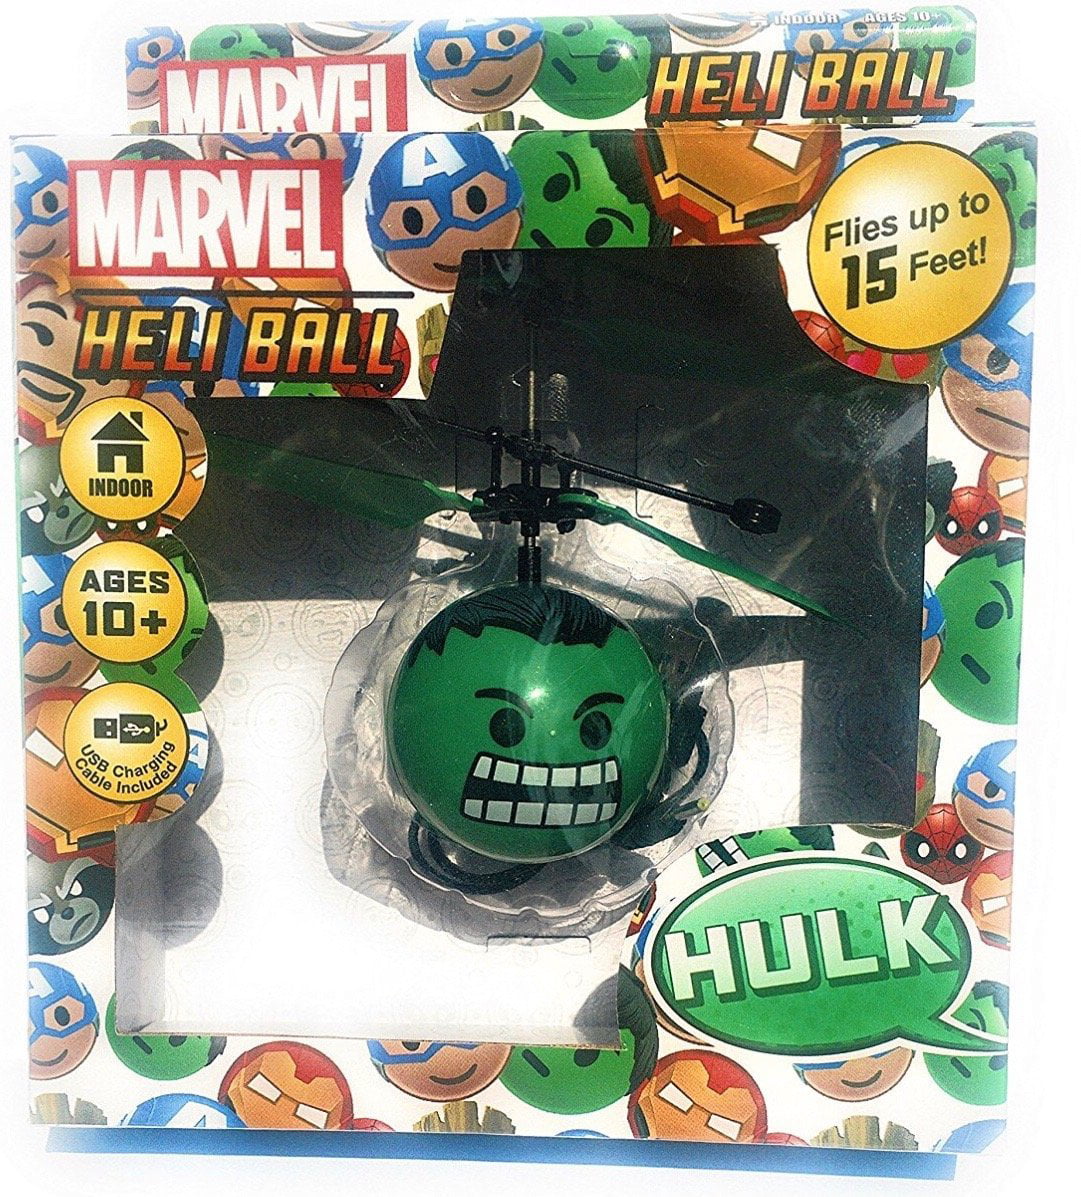 Marvel Hulk "Heli Ball" A Powerful Levitating Sphere Flies Up To 15' Ages 10+NEW 